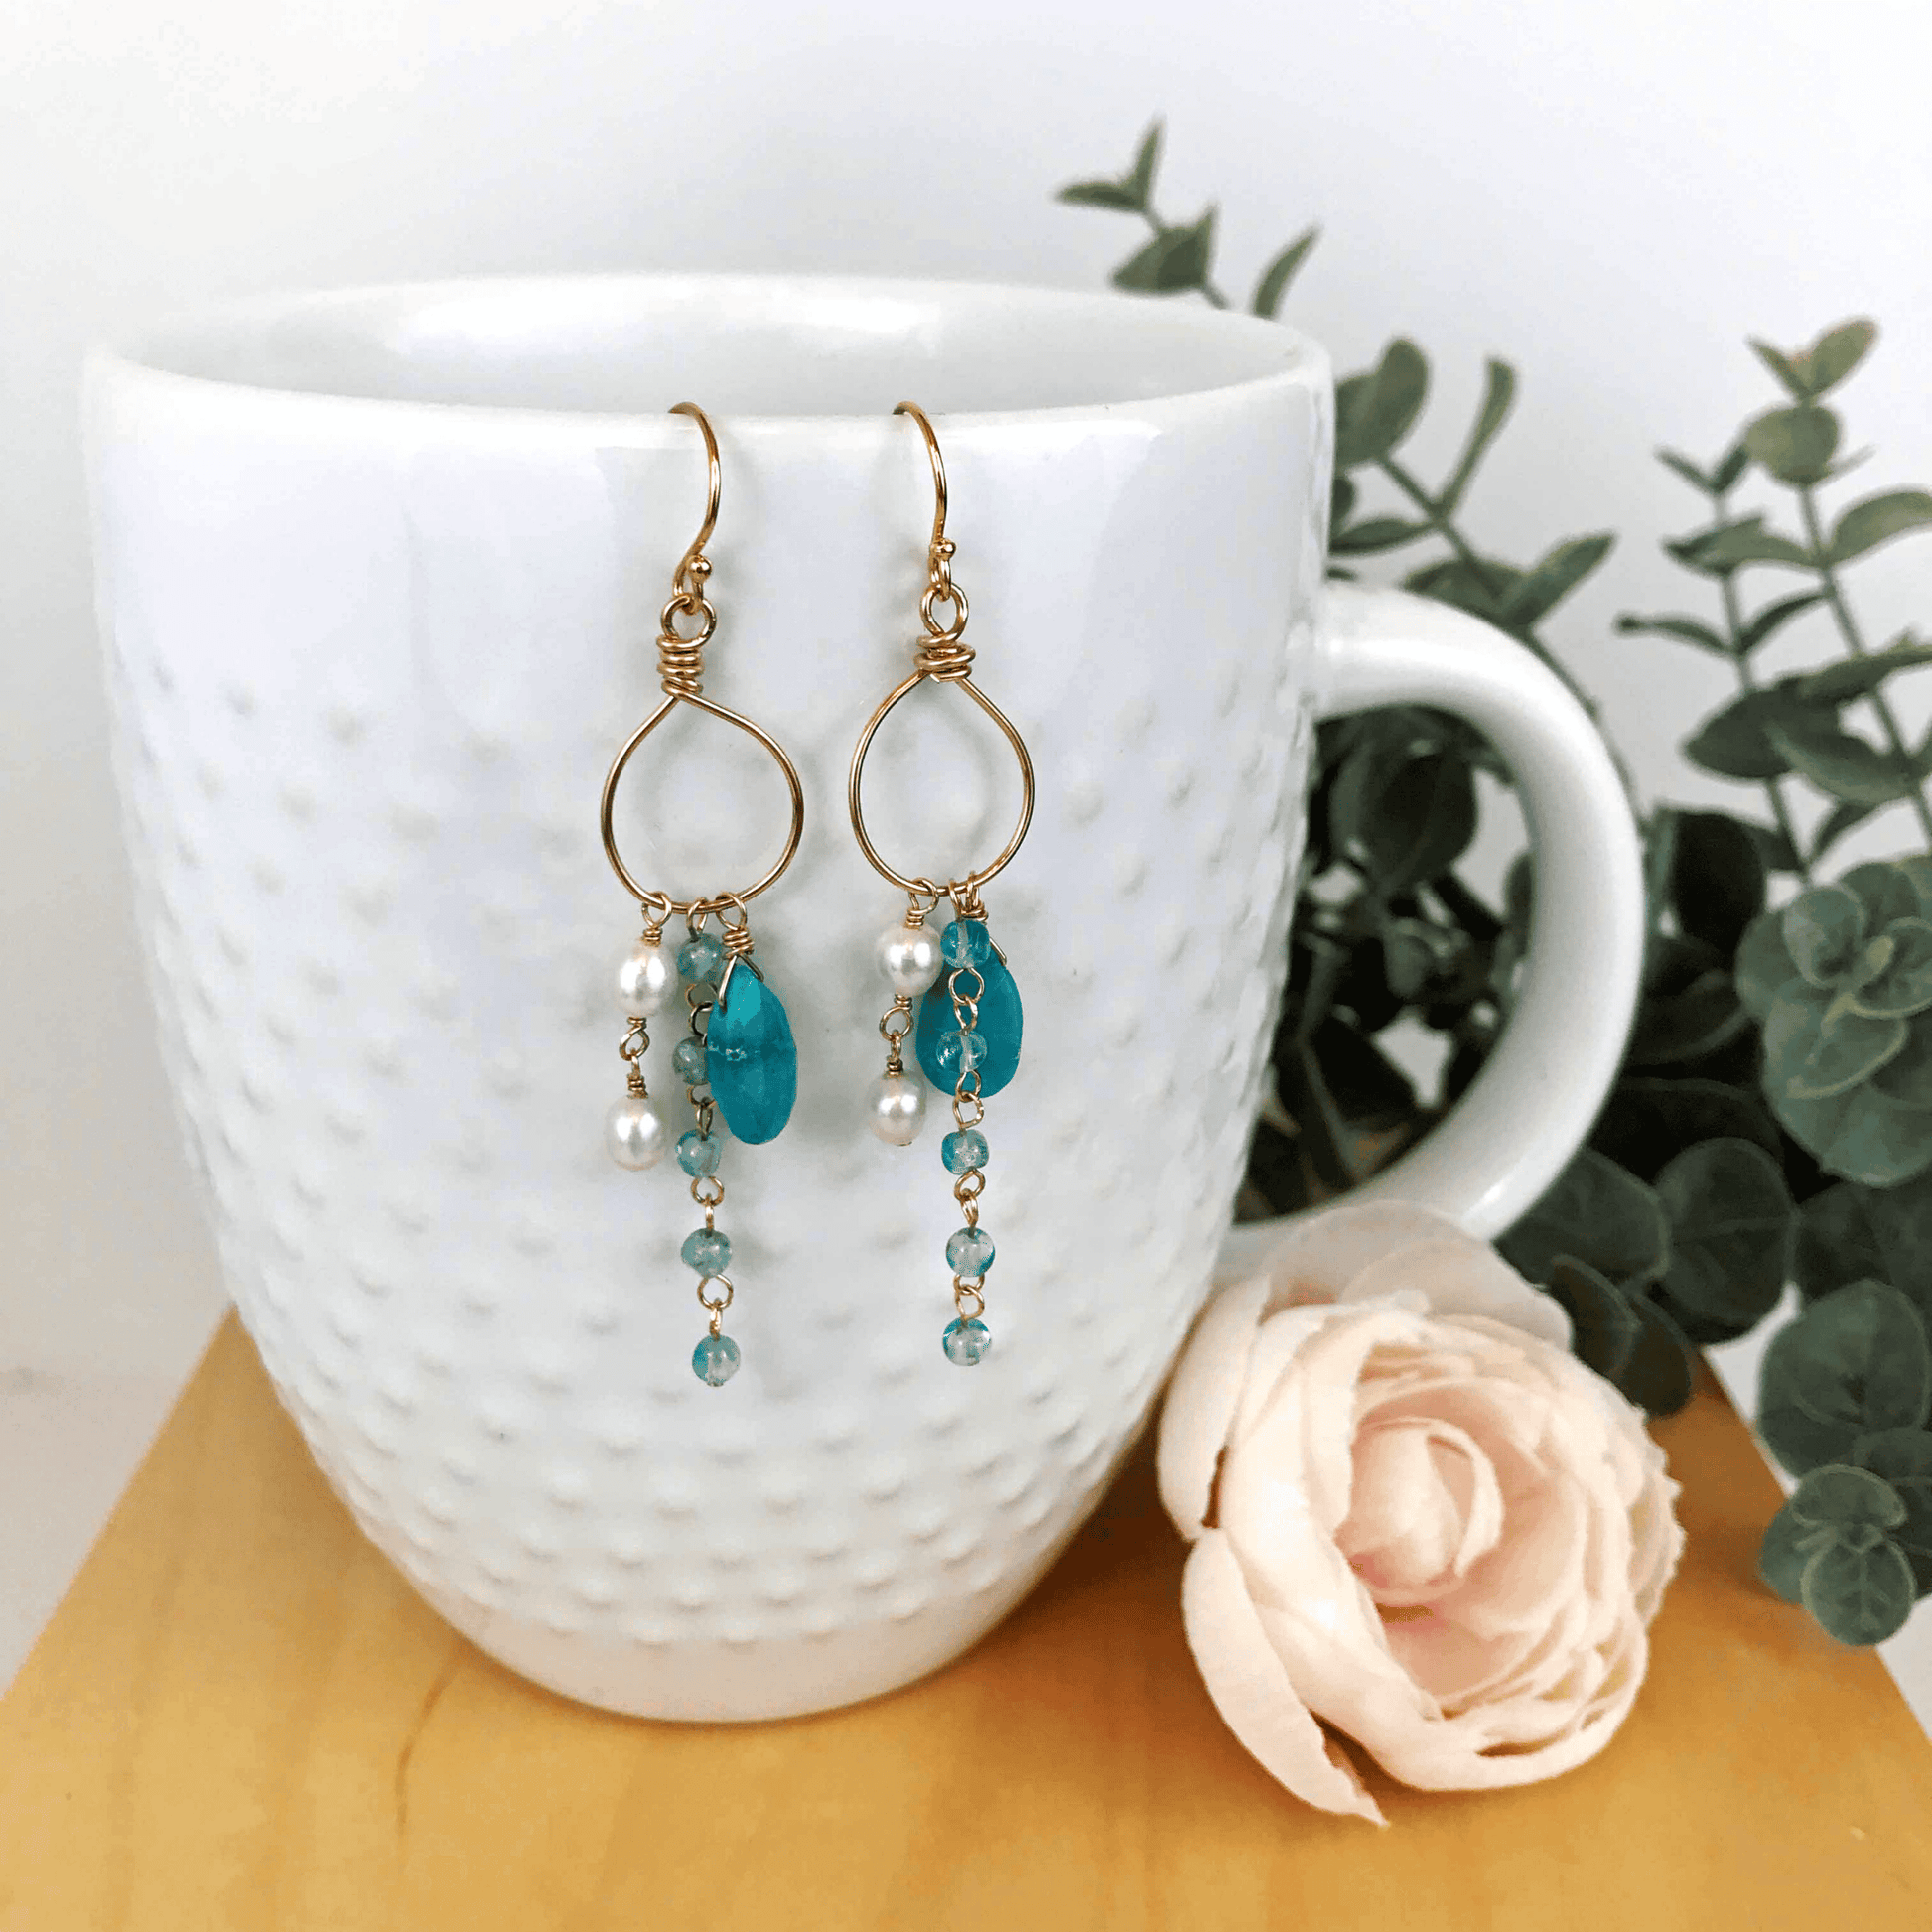 Turquoise cluster earrings with aquamarine